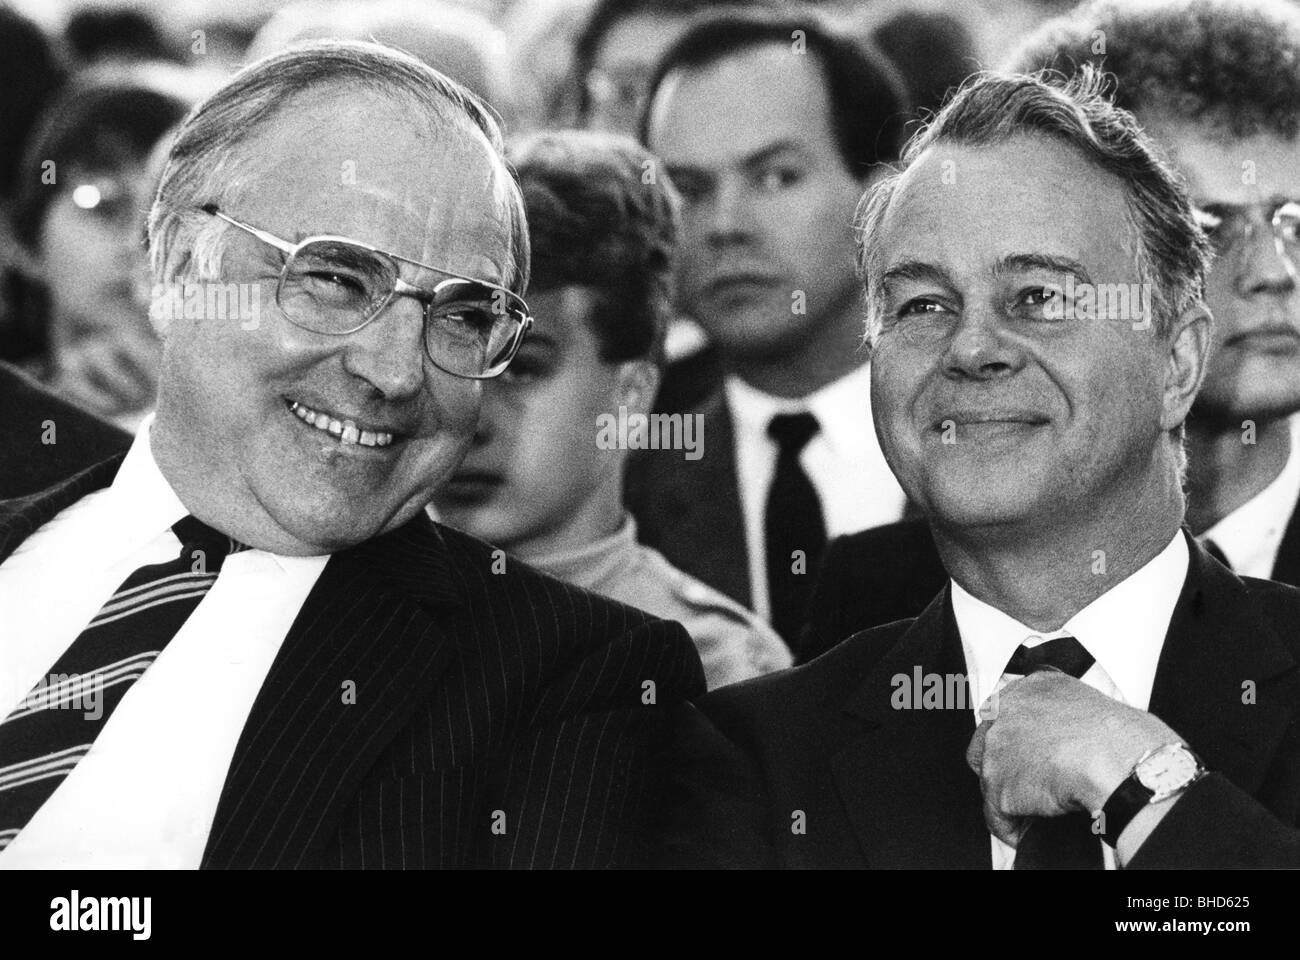 Kohl, Helmut, * 3.4.1930, German politician (CDU), Federal Chancellor 4.10.1982 - 26.10.1998, with Prime Minister of Lower Saxony Ernst Albrecht, meeting of the Silesians, Hanover, 14.- 16.6.1985, , Stock Photo